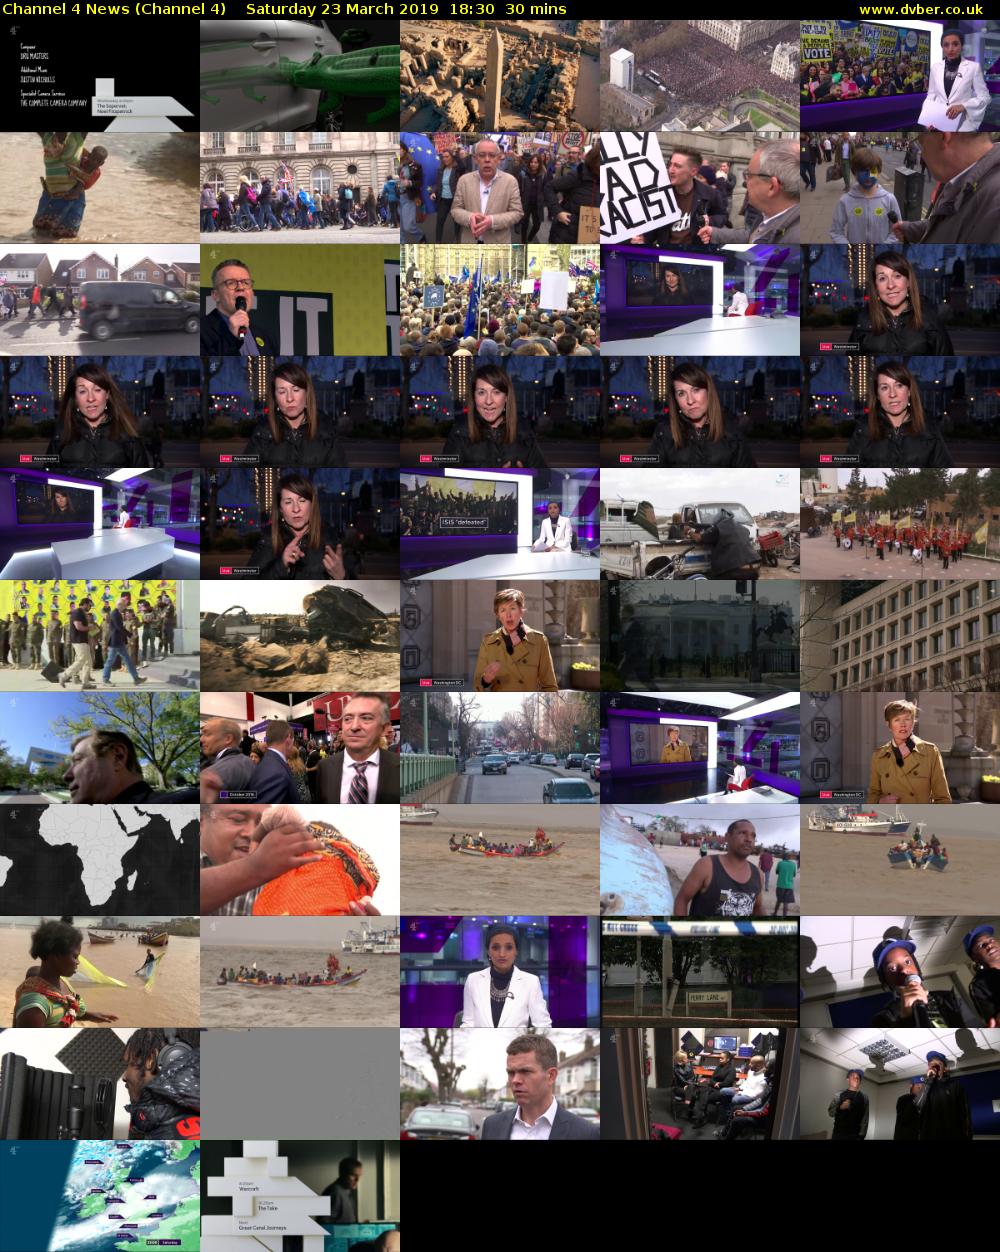 Channel 4 News (Channel 4) Saturday 23 March 2019 18:30 - 19:00